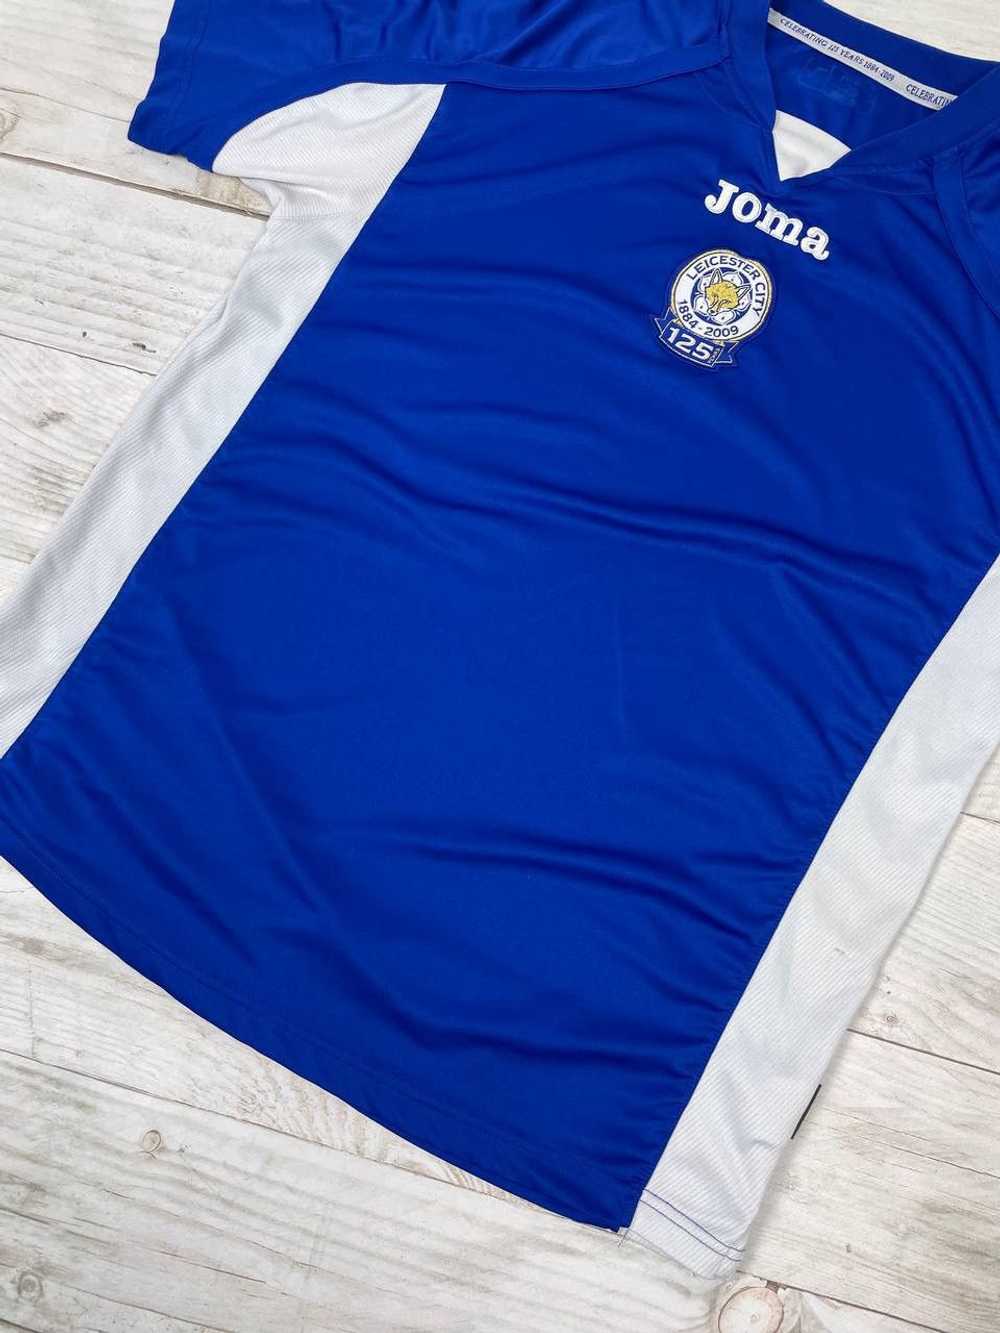 Joma × Soccer Jersey × Vintage Joma LEICESTER CIT… - image 3